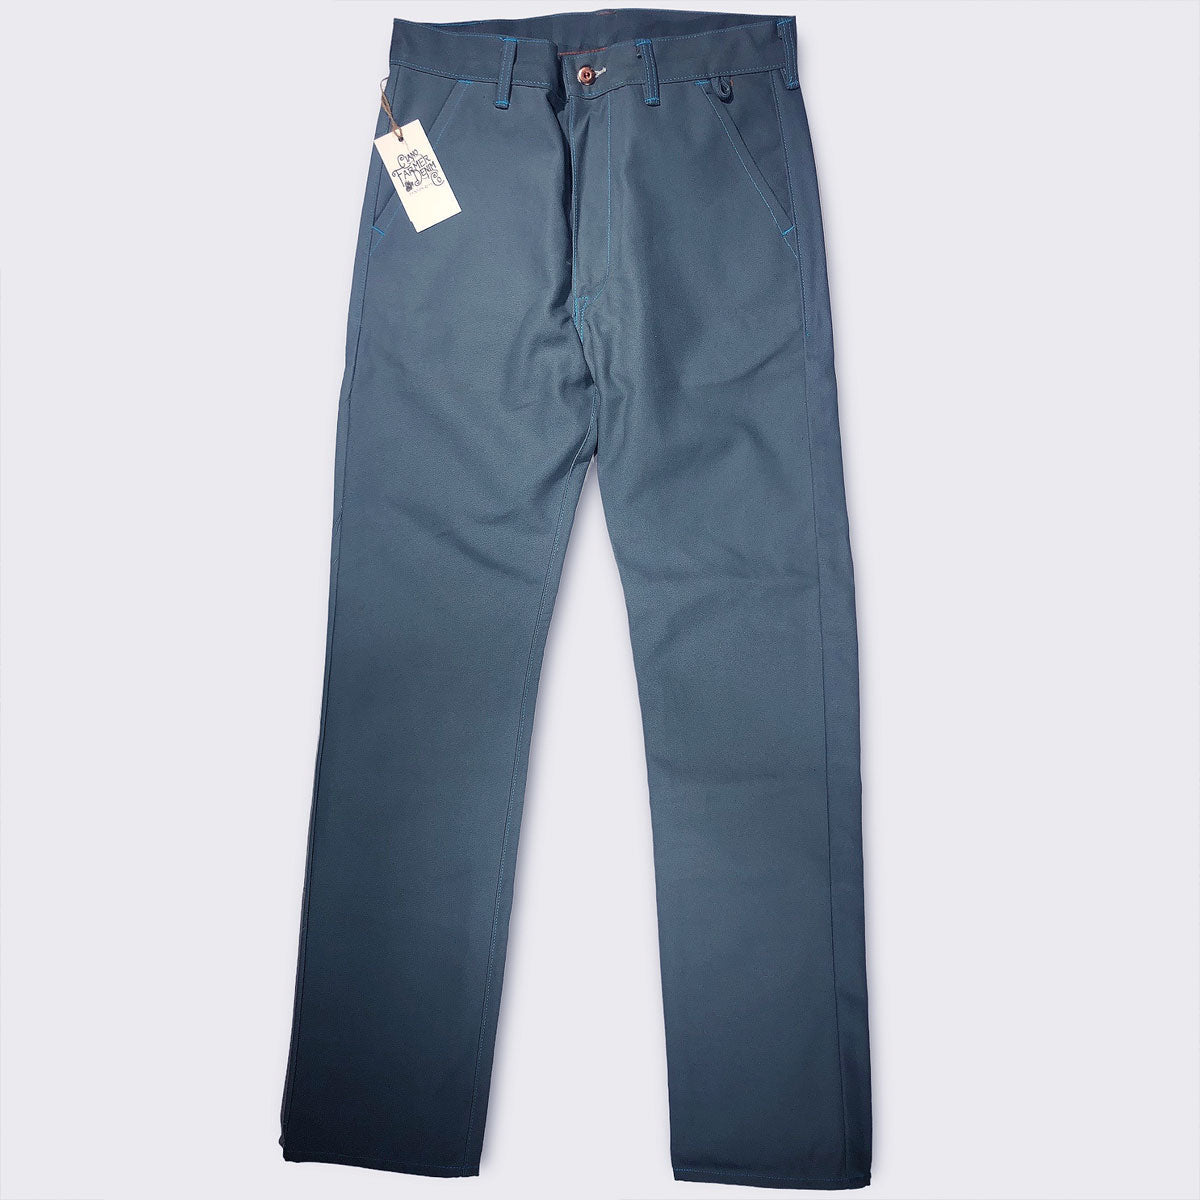 OPSTK 12oz SeaGrass Duck Canvas FIELDHAND Chino 32W 31L 997 Miner Fit